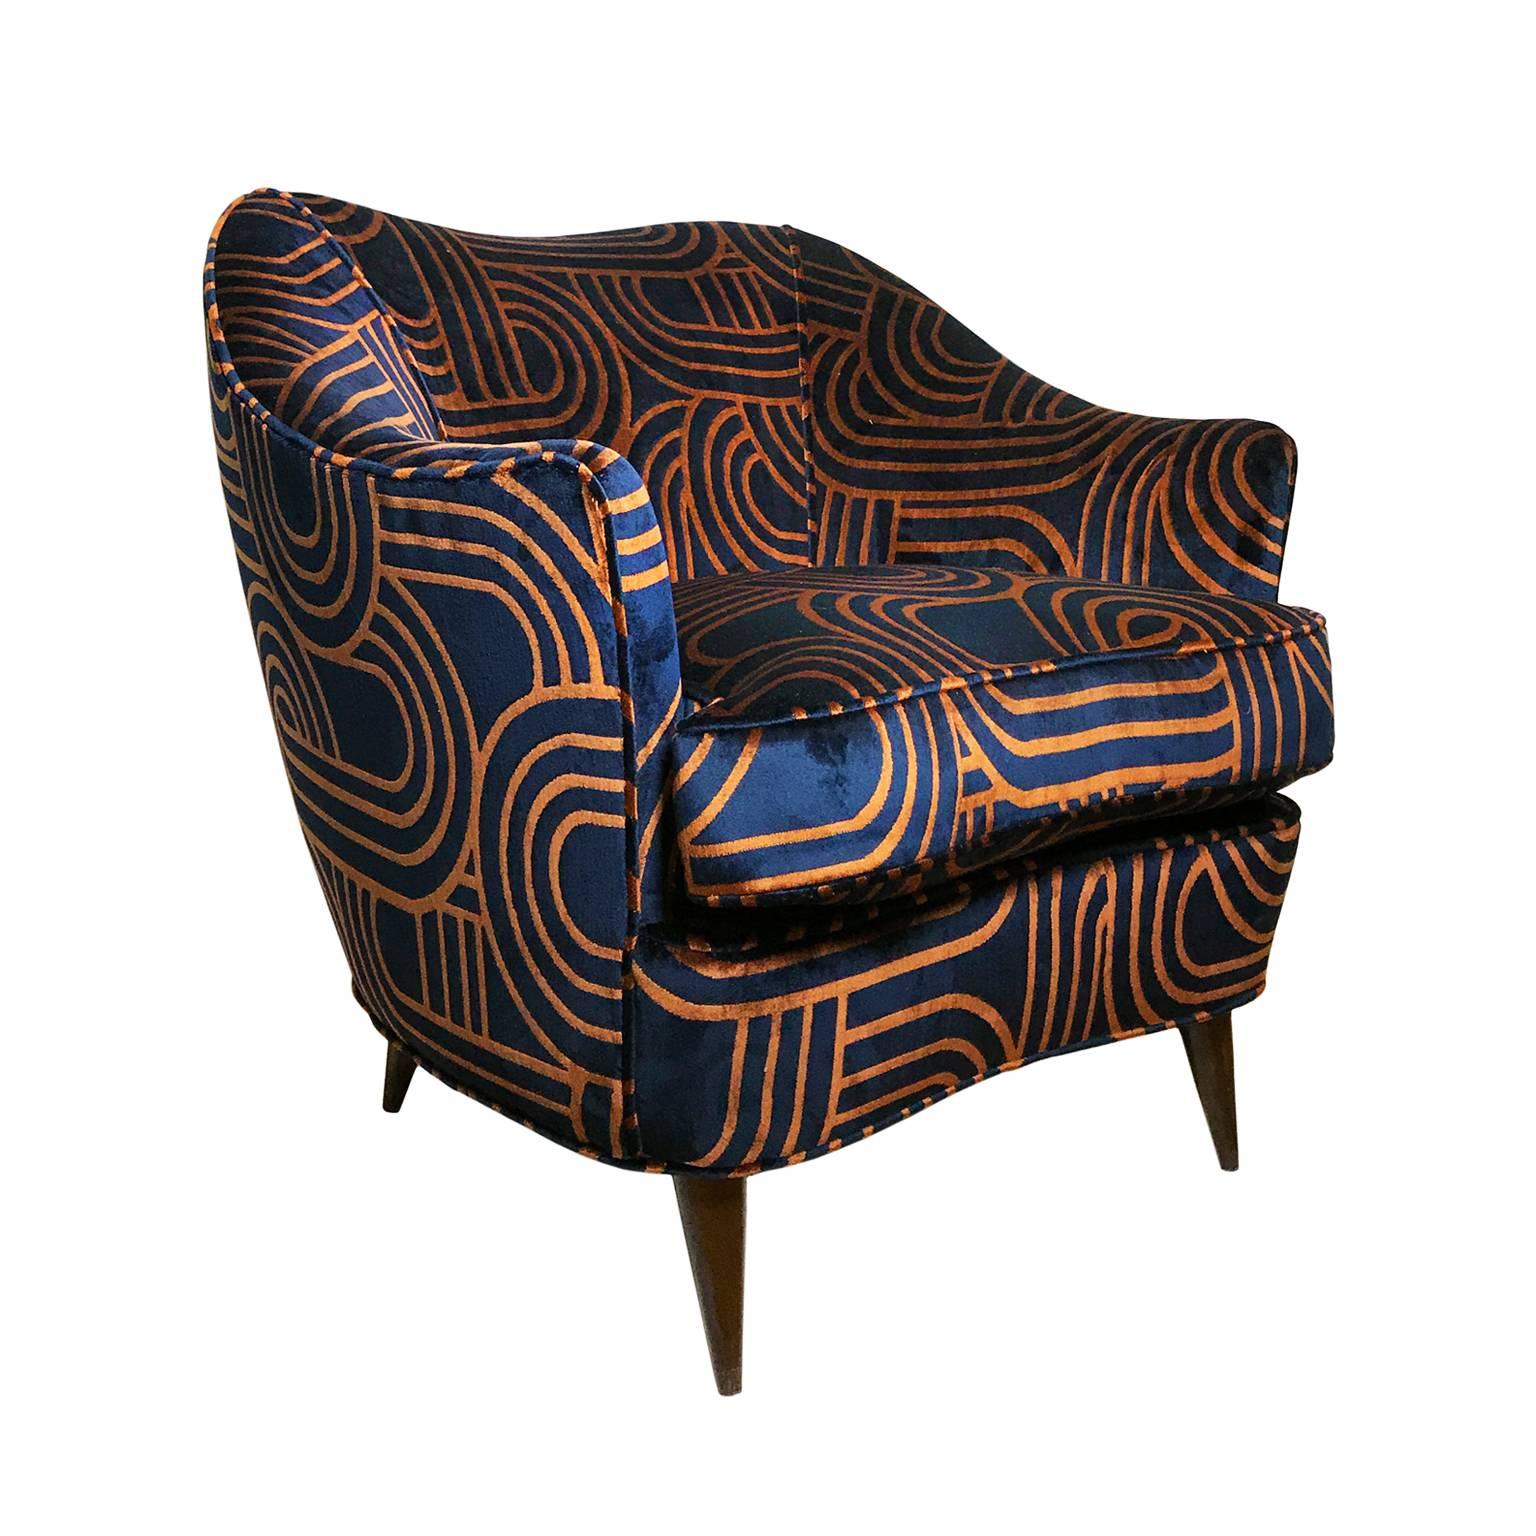 1960's Italian Gio Ponti barrel back club chair on tapered wooden legs in navy blue and copper swirl velvet upholstery. 

Pair available, priced individually.